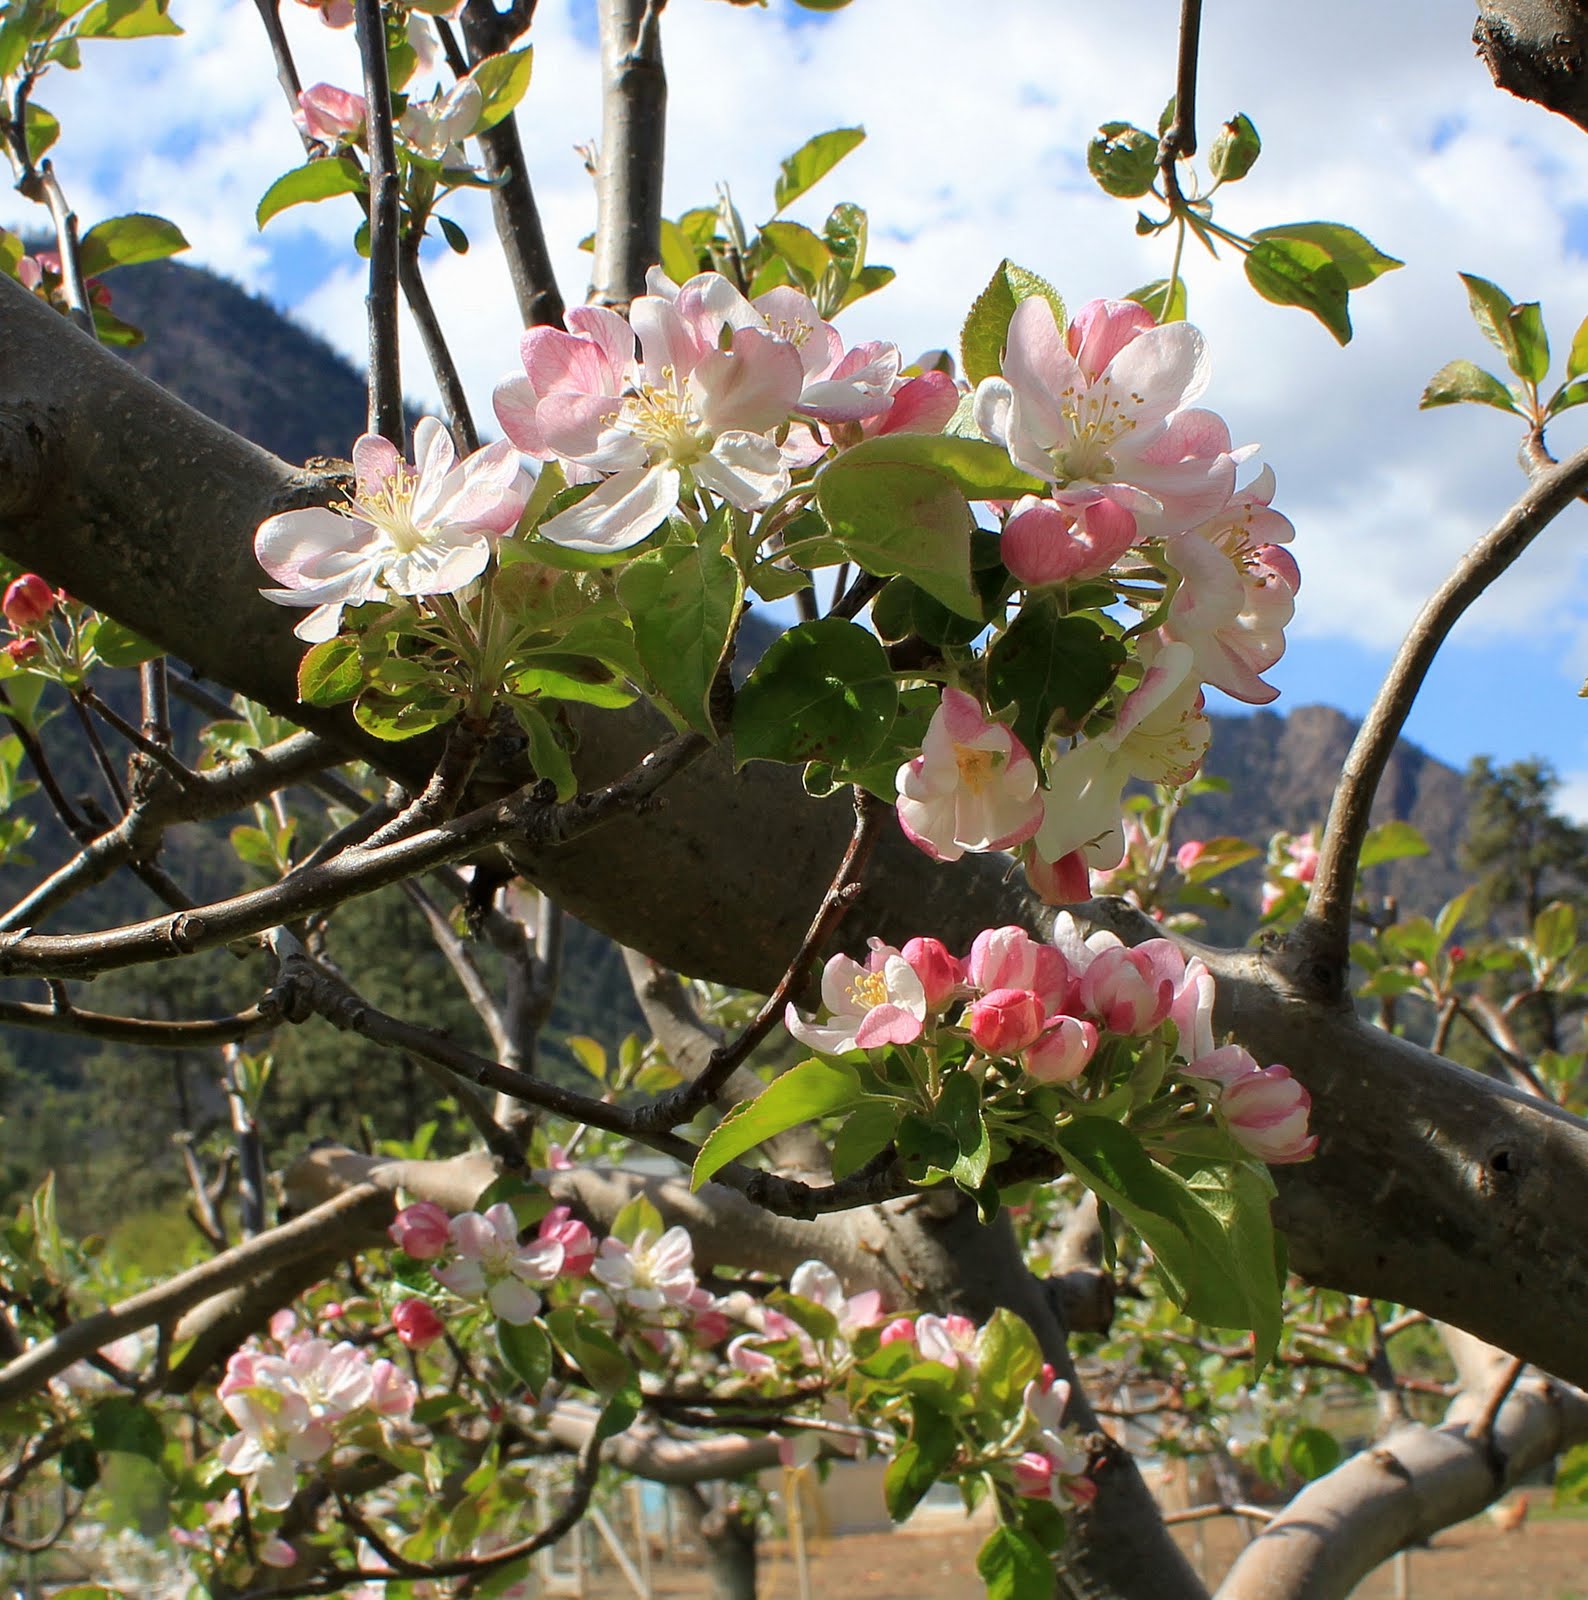 Collection 103+ Images pictures of fruit trees in bloom Updated